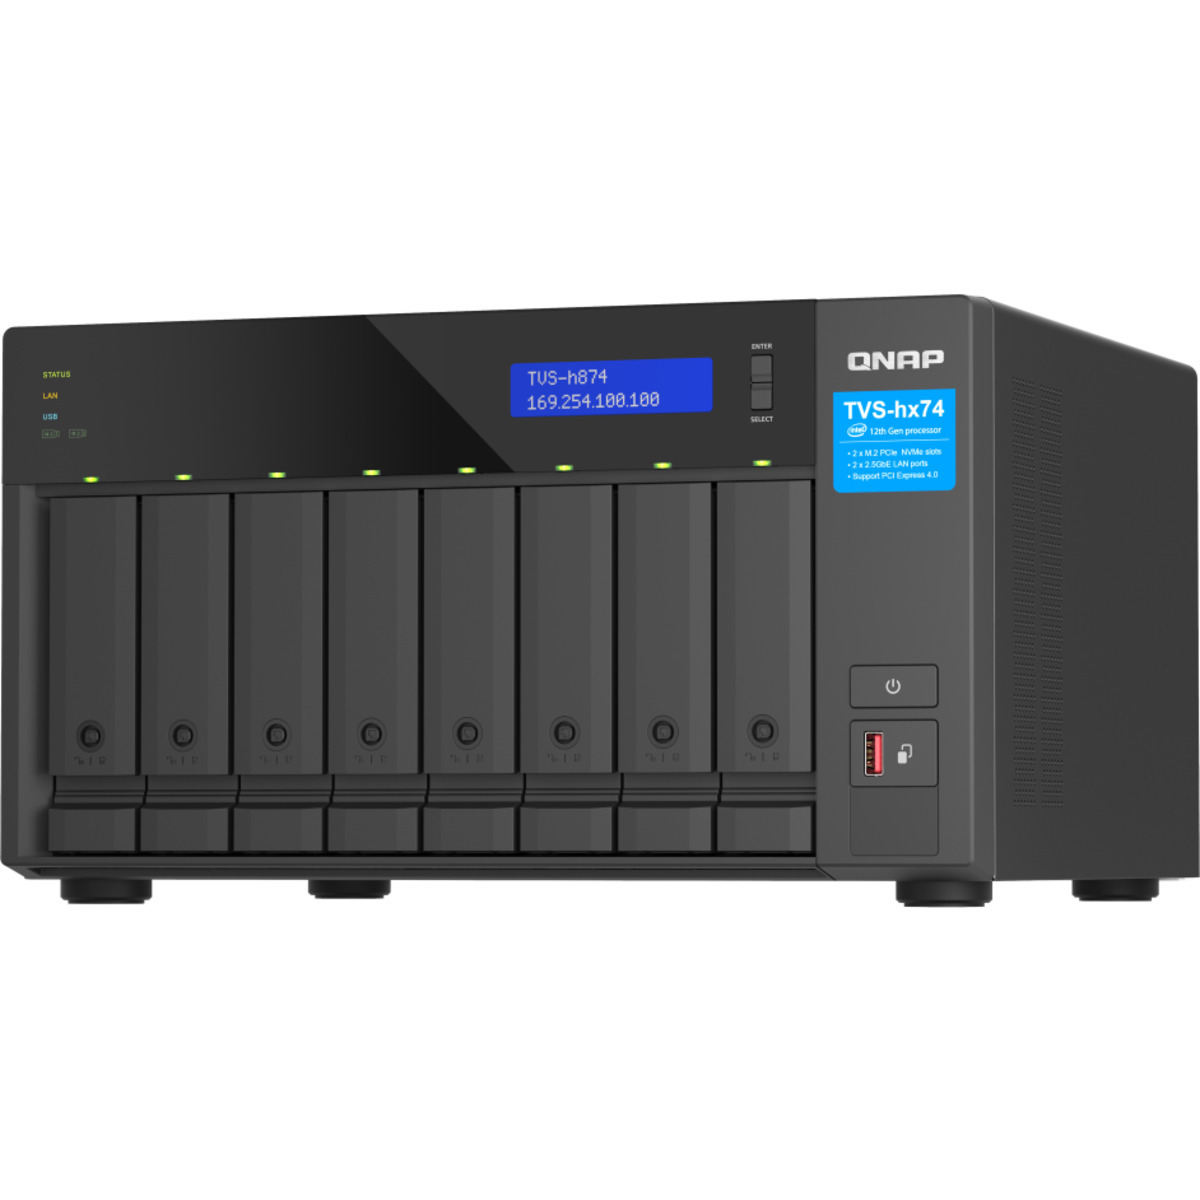 QNAP TVS-h874 Core i5 132tb 8-Bay Desktop Multimedia / Power User / Business NAS - Network Attached Storage Device 6x22tb Western Digital Ultrastar HC580 WUH722422ALE6L4 3.5 7200rpm SATA 6Gb/s HDD ENTERPRISE Class Drives Installed - Burn-In Tested TVS-h874 Core i5